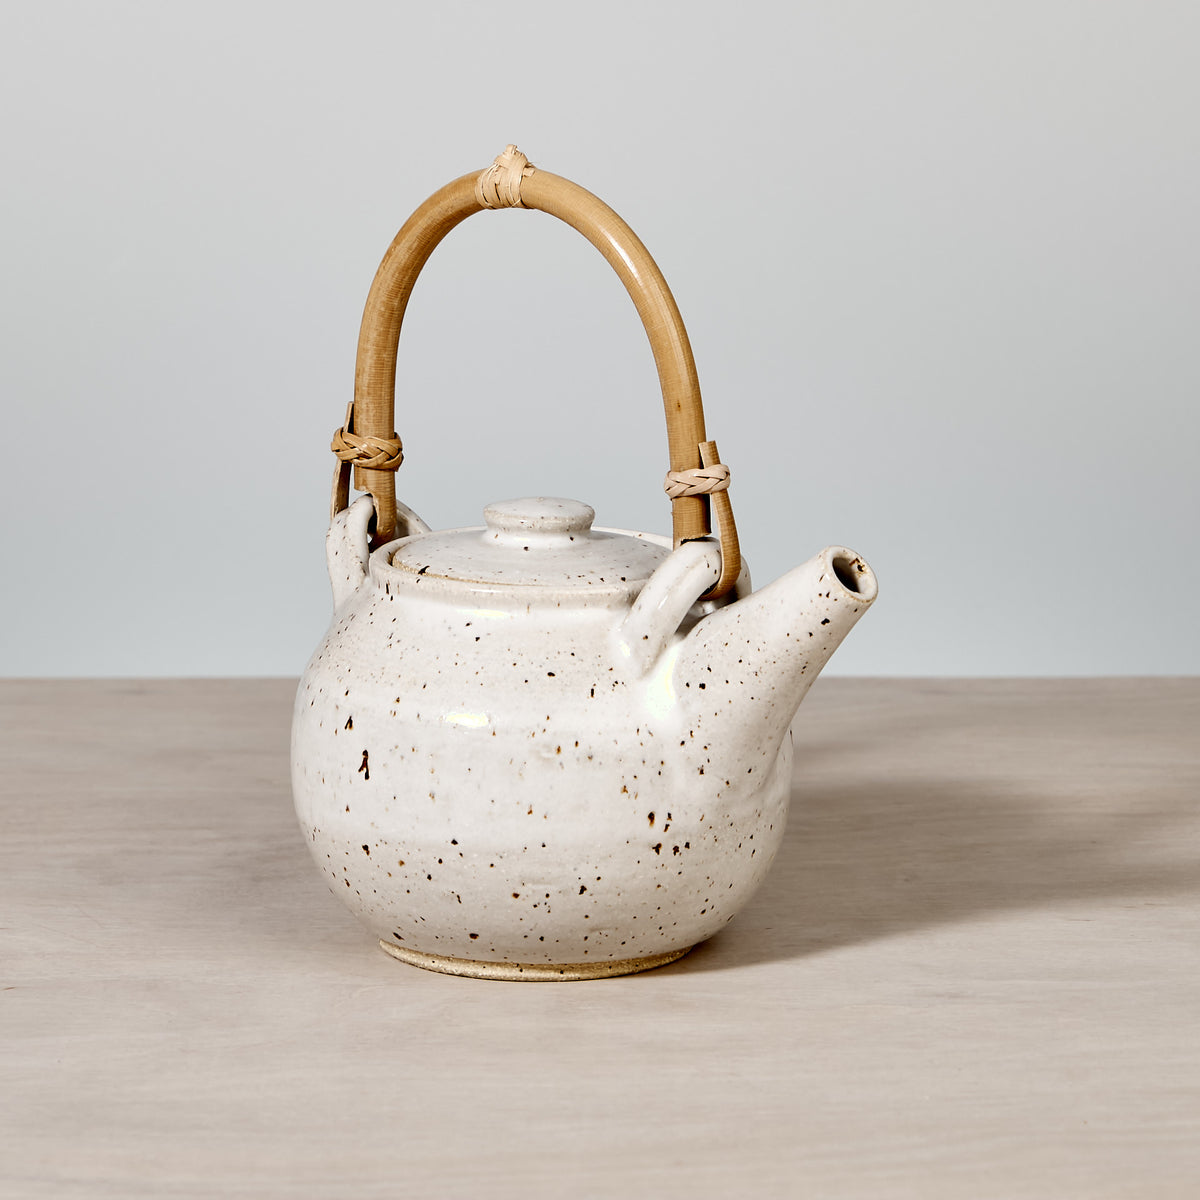 A handmade white Tea Pot - Speckled with Bamboo handle by Nicola Shuttleworth on a wooden table.